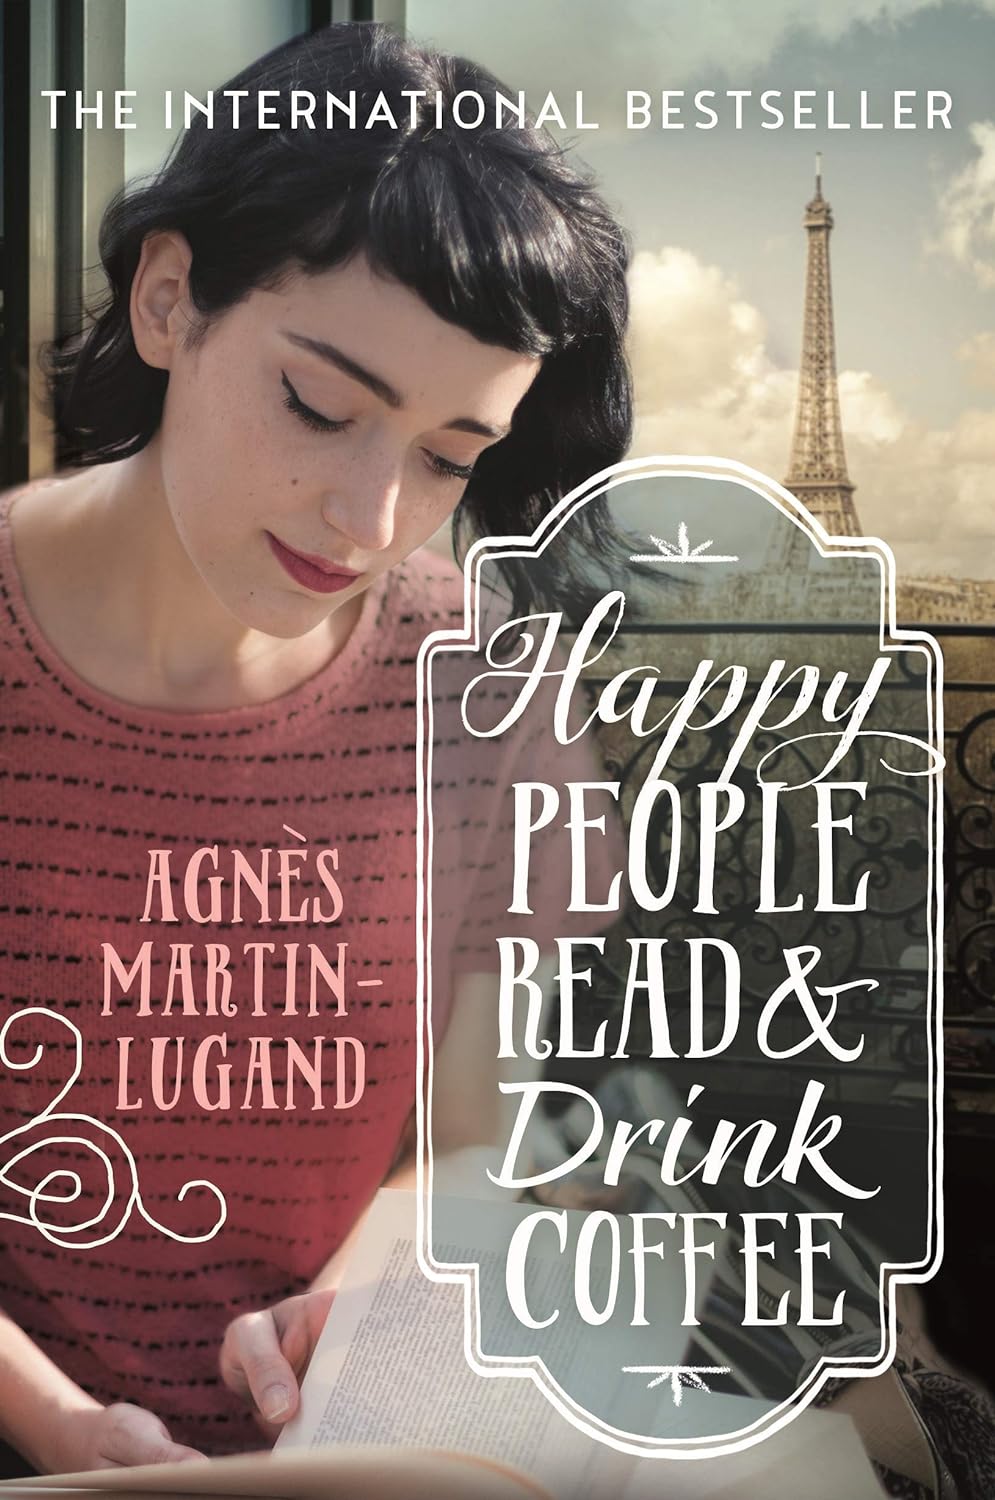 Agnès Martin-Lugand: Happy People Read and Drink Coffee (Paperback, english language, 2017, Allen & Unwin)